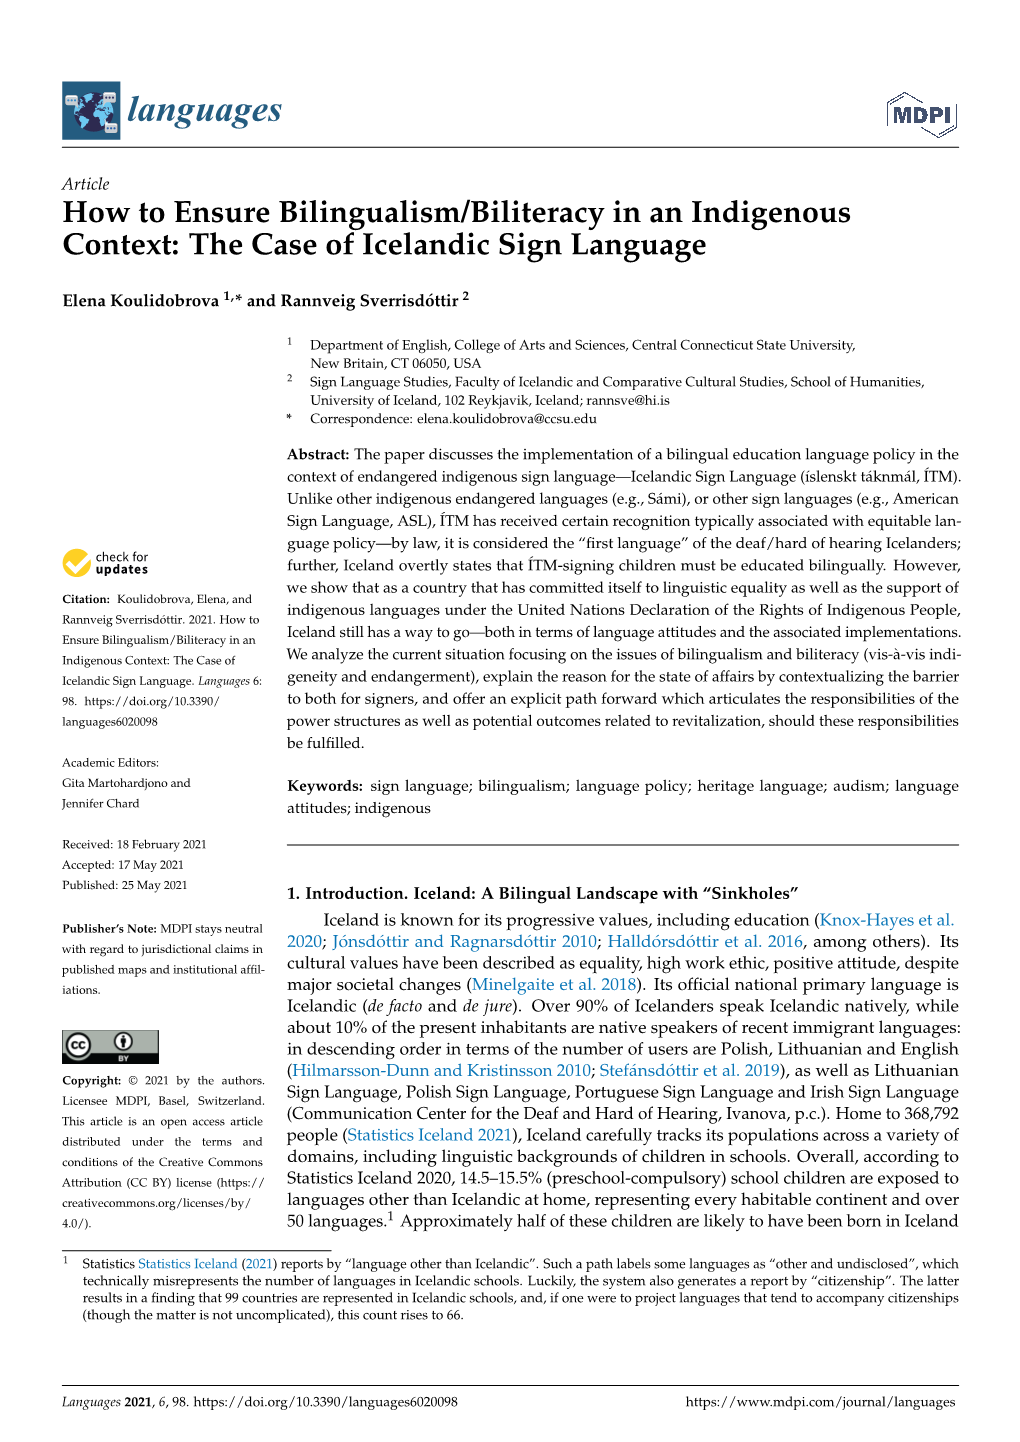 How to Ensure Bilingualism/Biliteracy in an Indigenous Context: the Case of Icelandic Sign Language